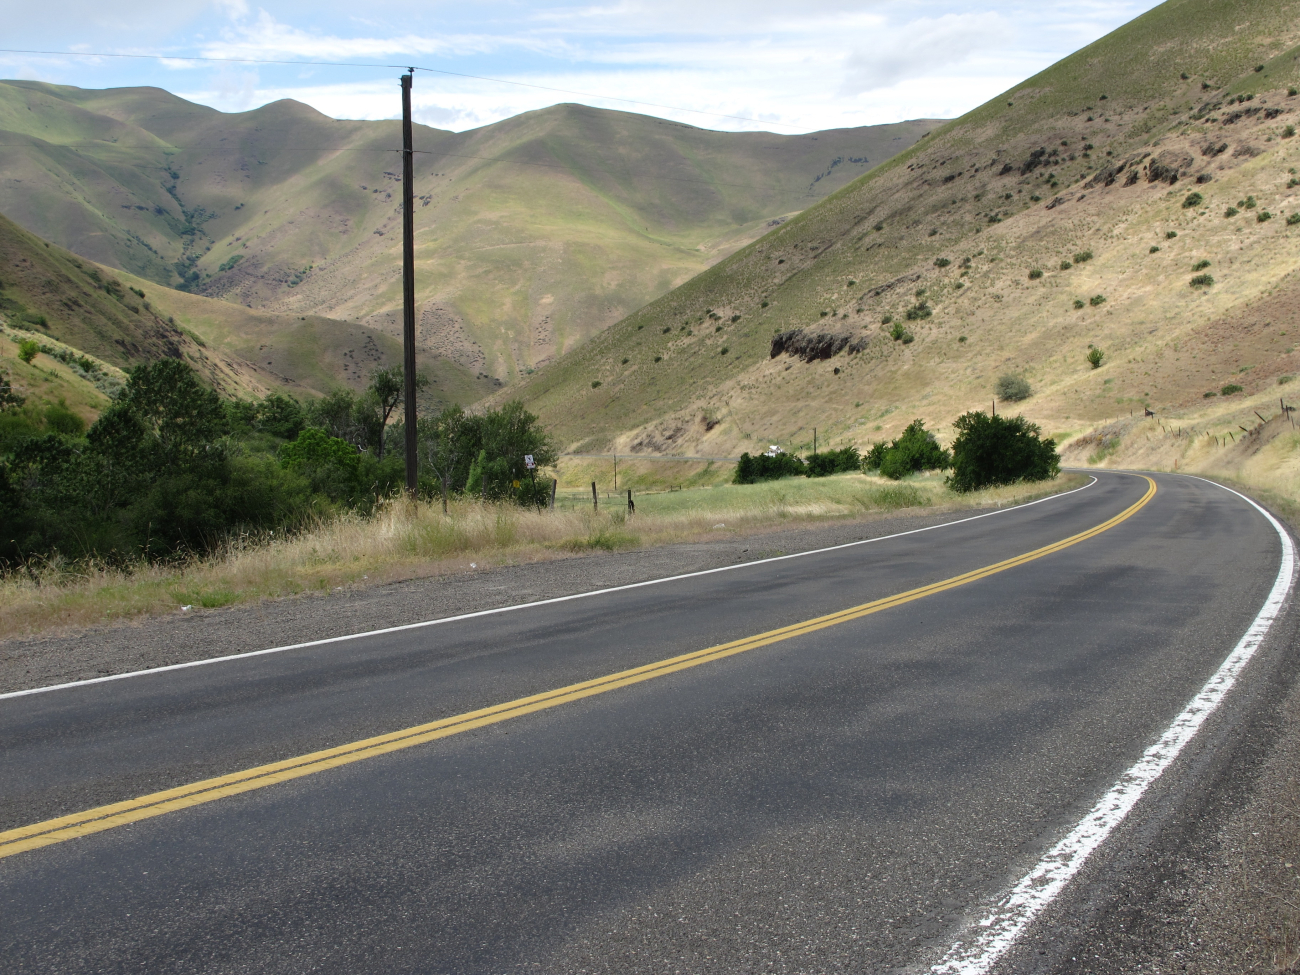 The descent into Hells Canyon, 2000 feet straight down into the canyon on IdahoState Highway 71